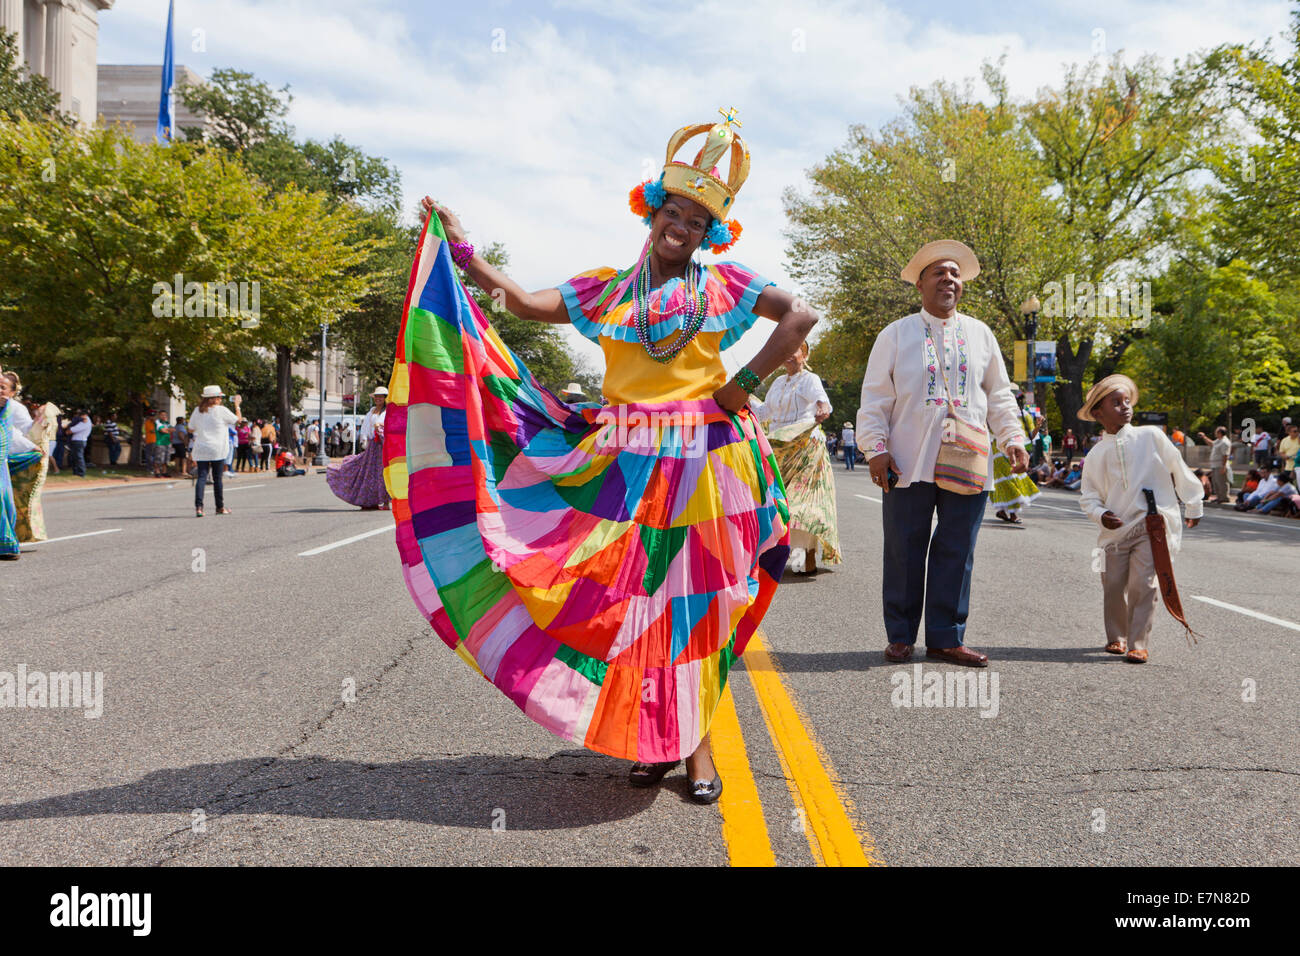 Dancer performing Jarabe Tapatio (Mexican Hat dance) at outdoor festival - Washington, DC USA Stock Photo